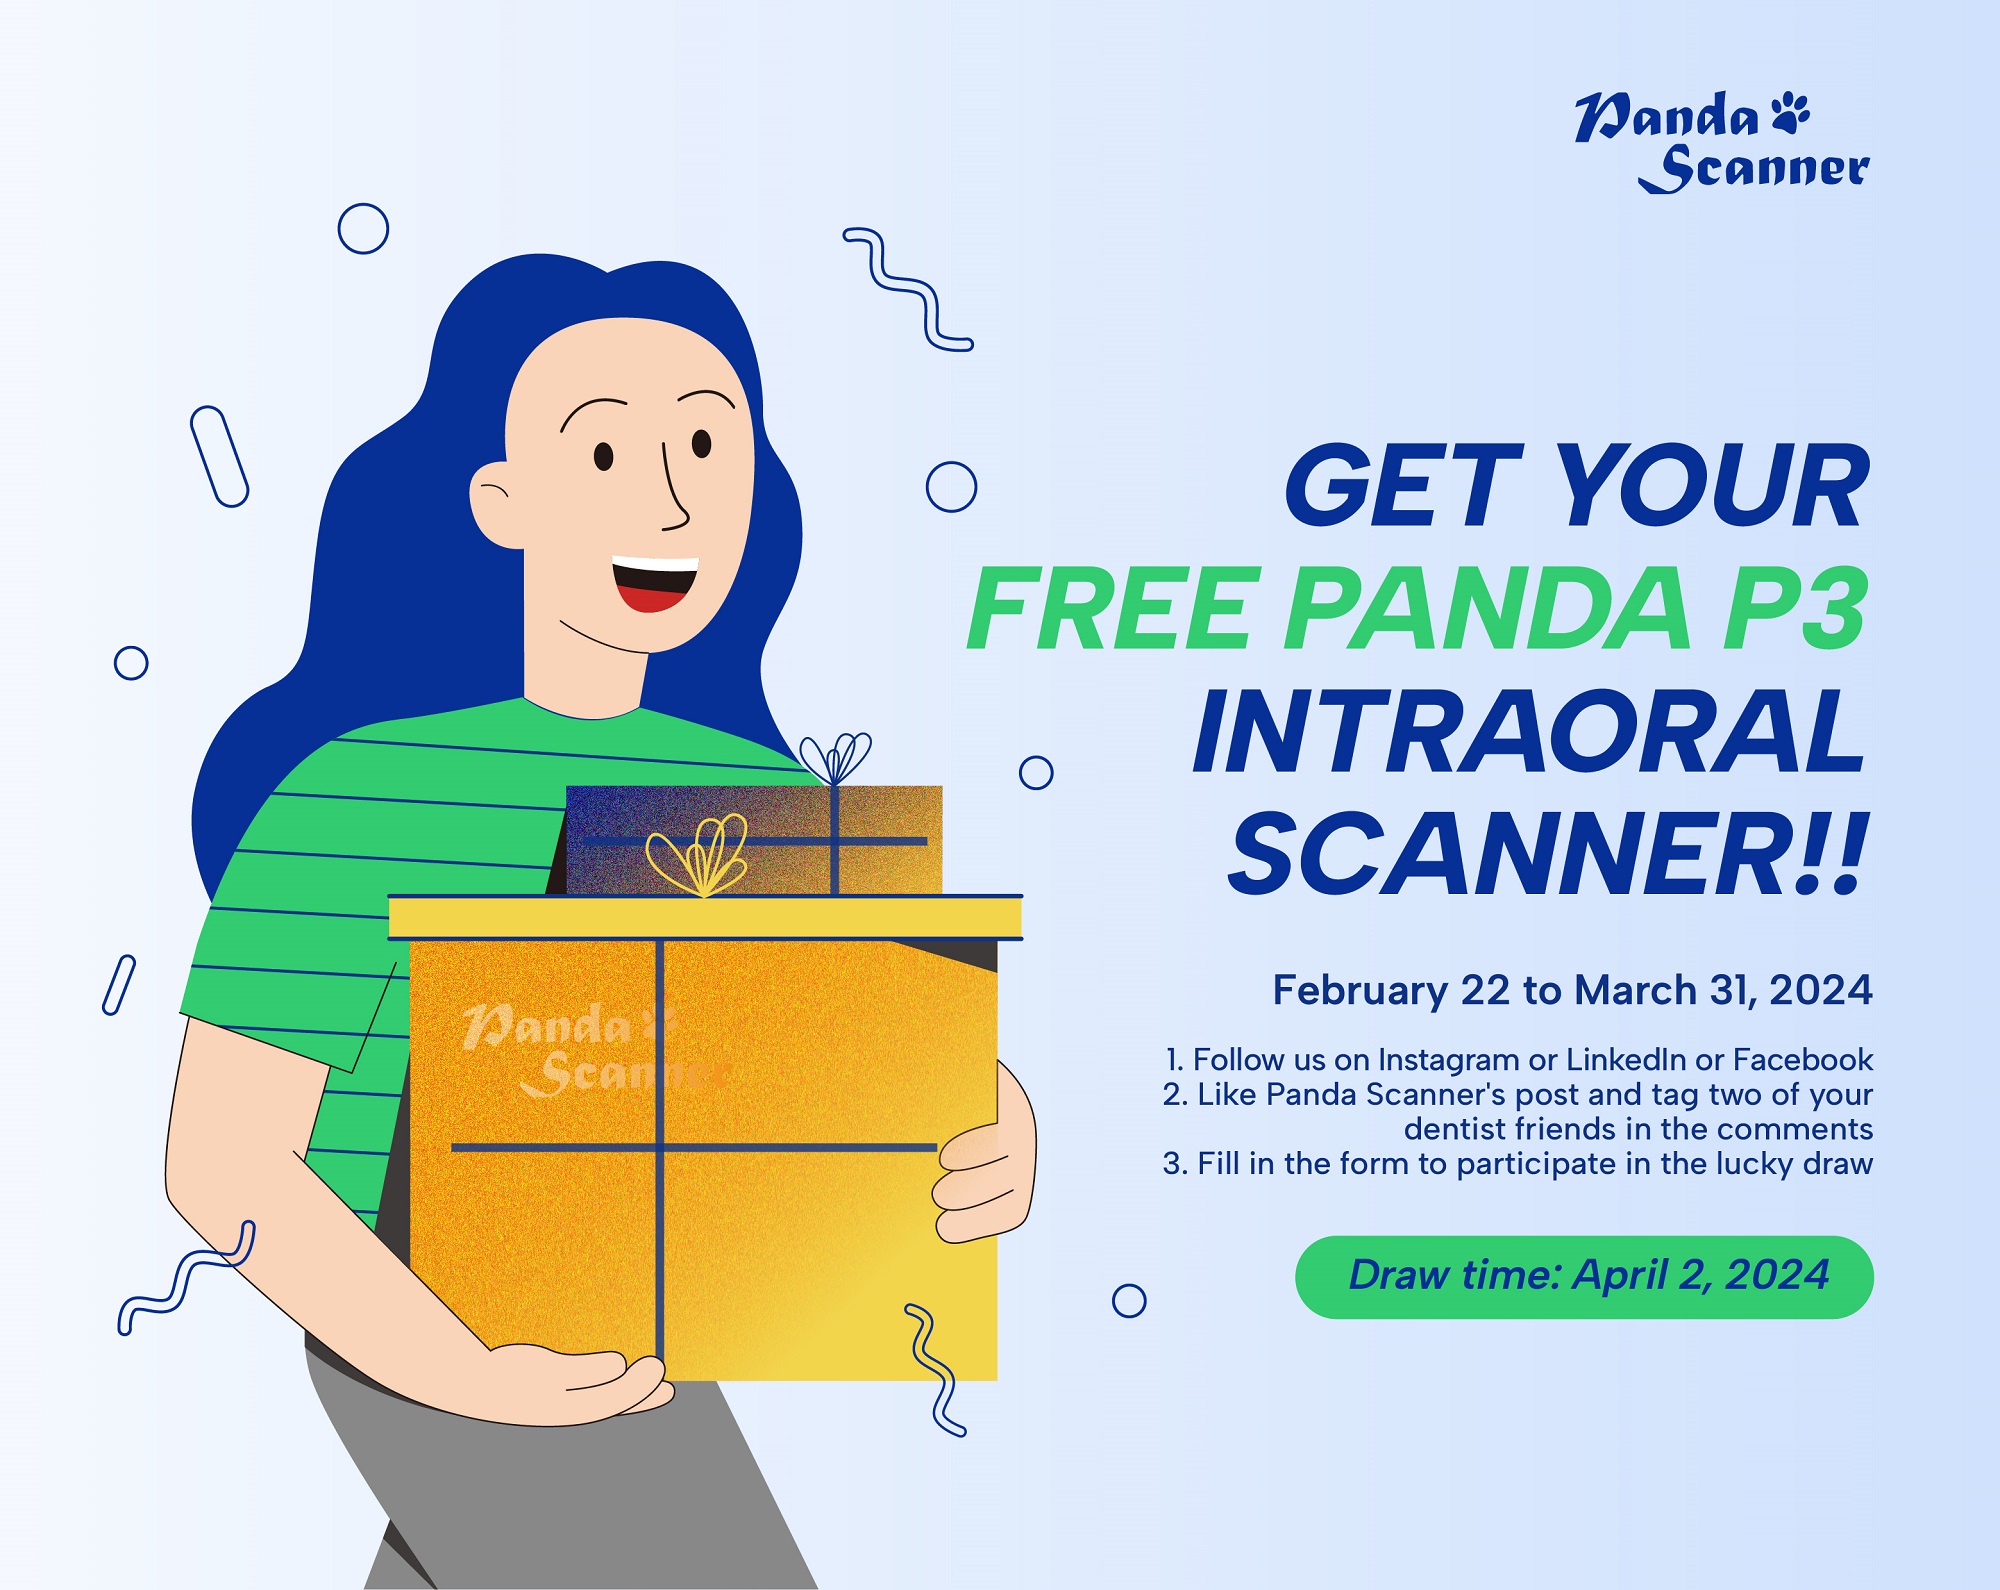 Participate in the online lucky draw to win a free PANDA P3 intraoral scanner!